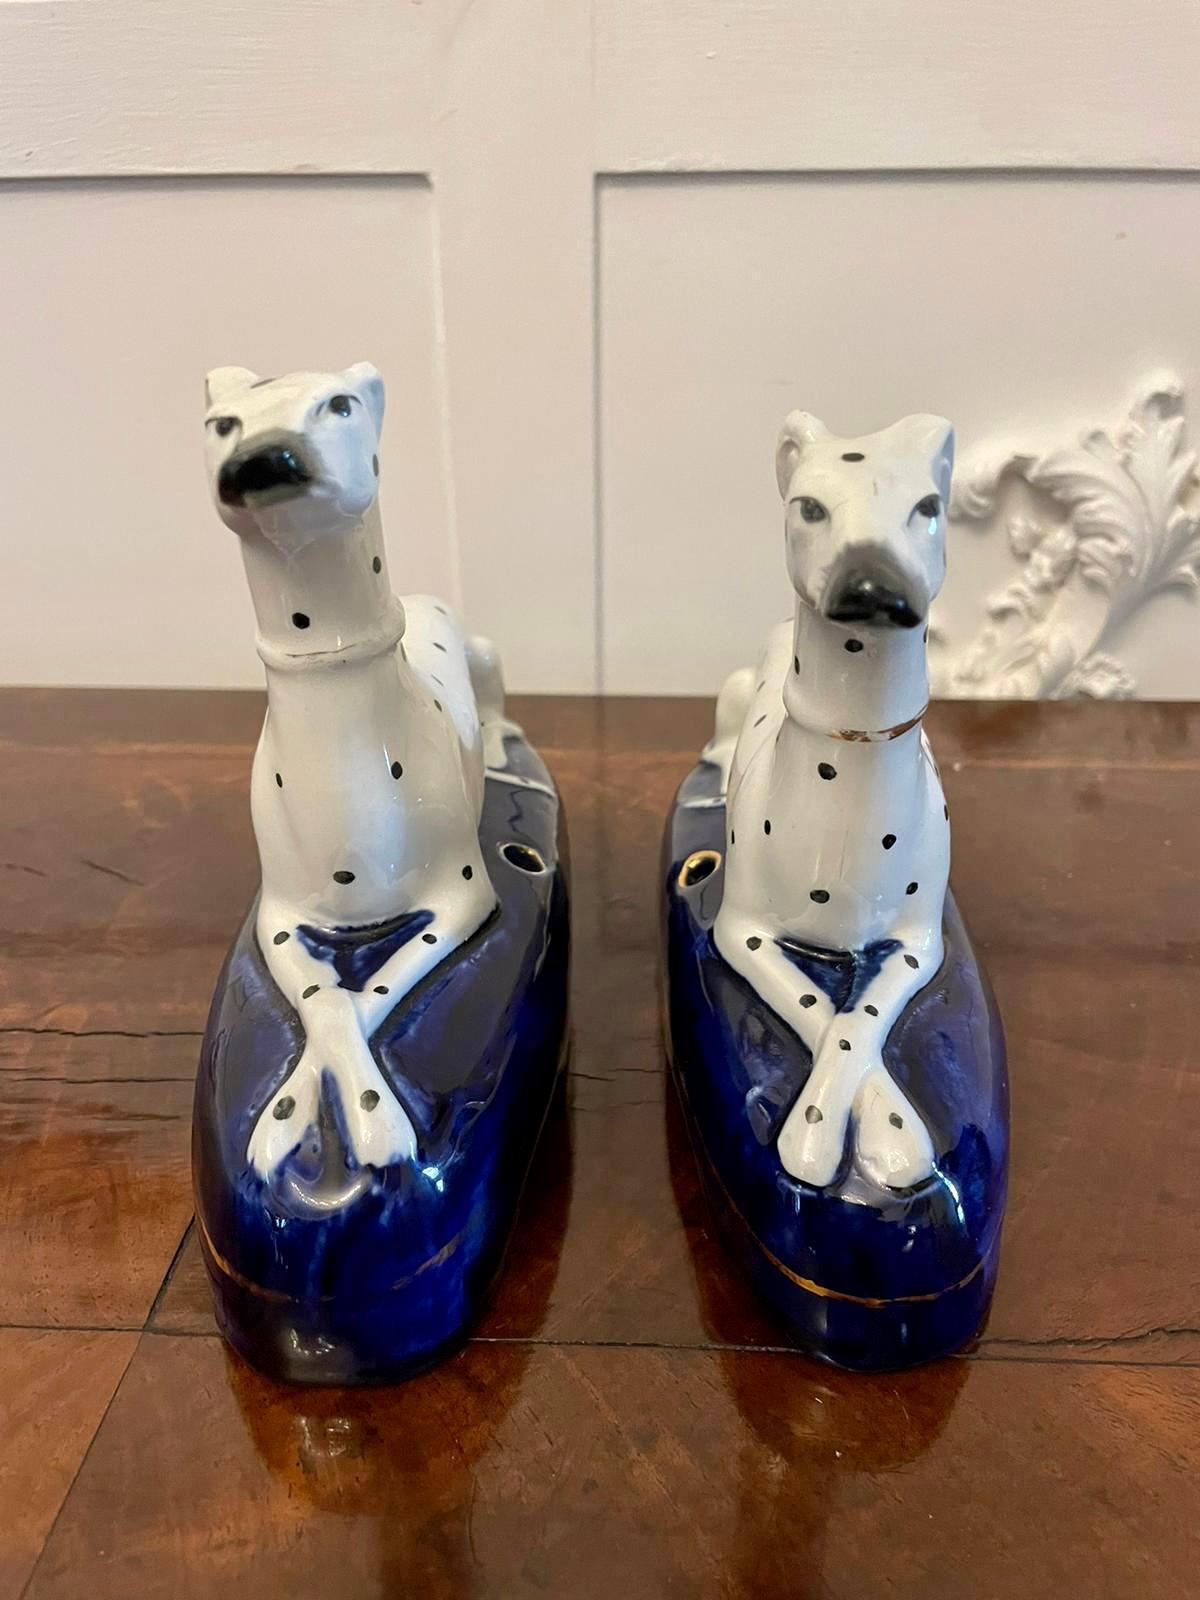 Unusual pair of antique Victorian quality Staffordshire inkwells of white and black spotted dogs on an oval blue base

An attractive pair in perfect original condition

H 14.5 x W 18 x D 6.5cm
Date 1860.
 